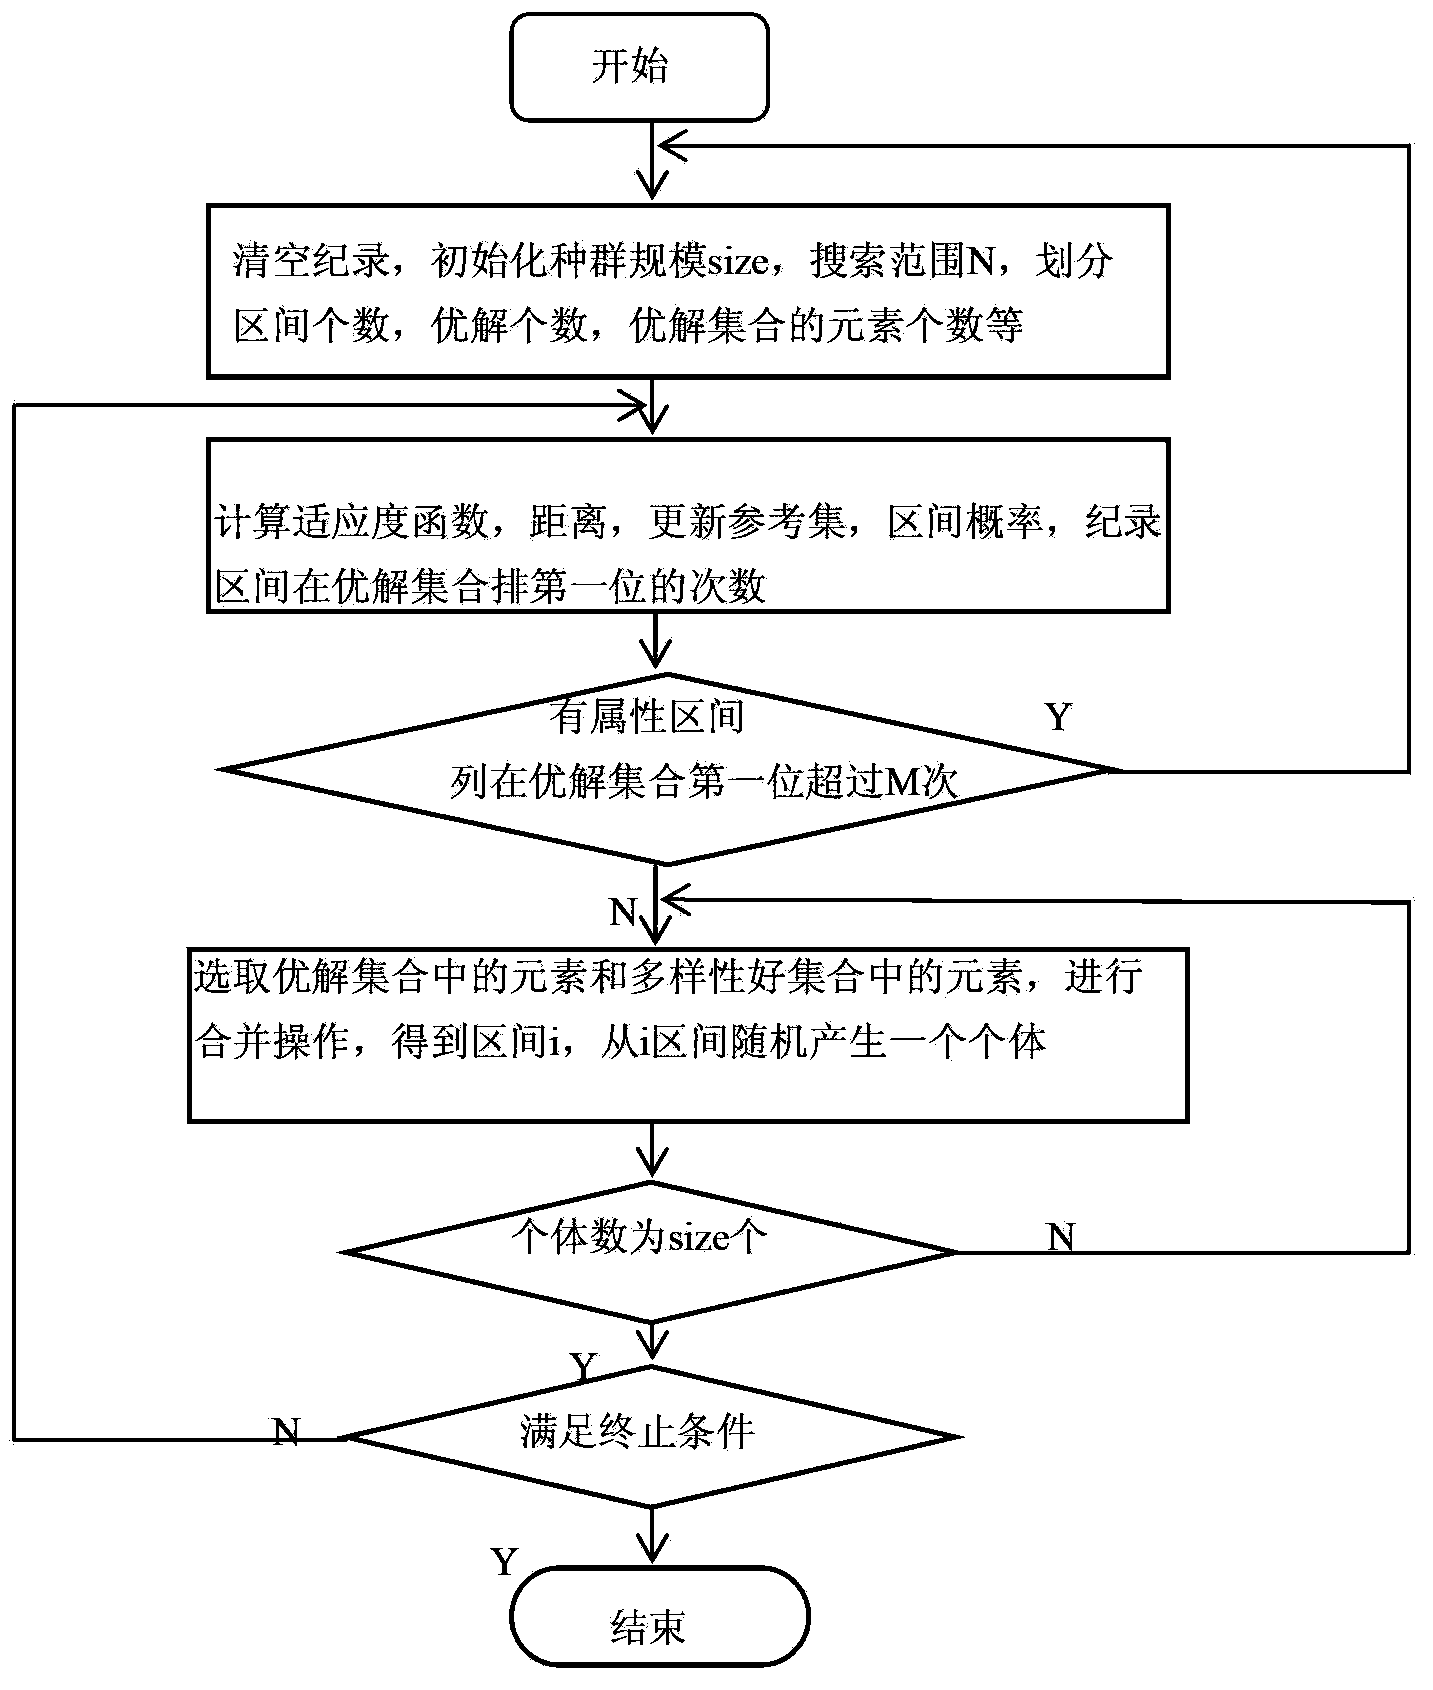 Gas optimization scheduling device of iron and steel enterprise